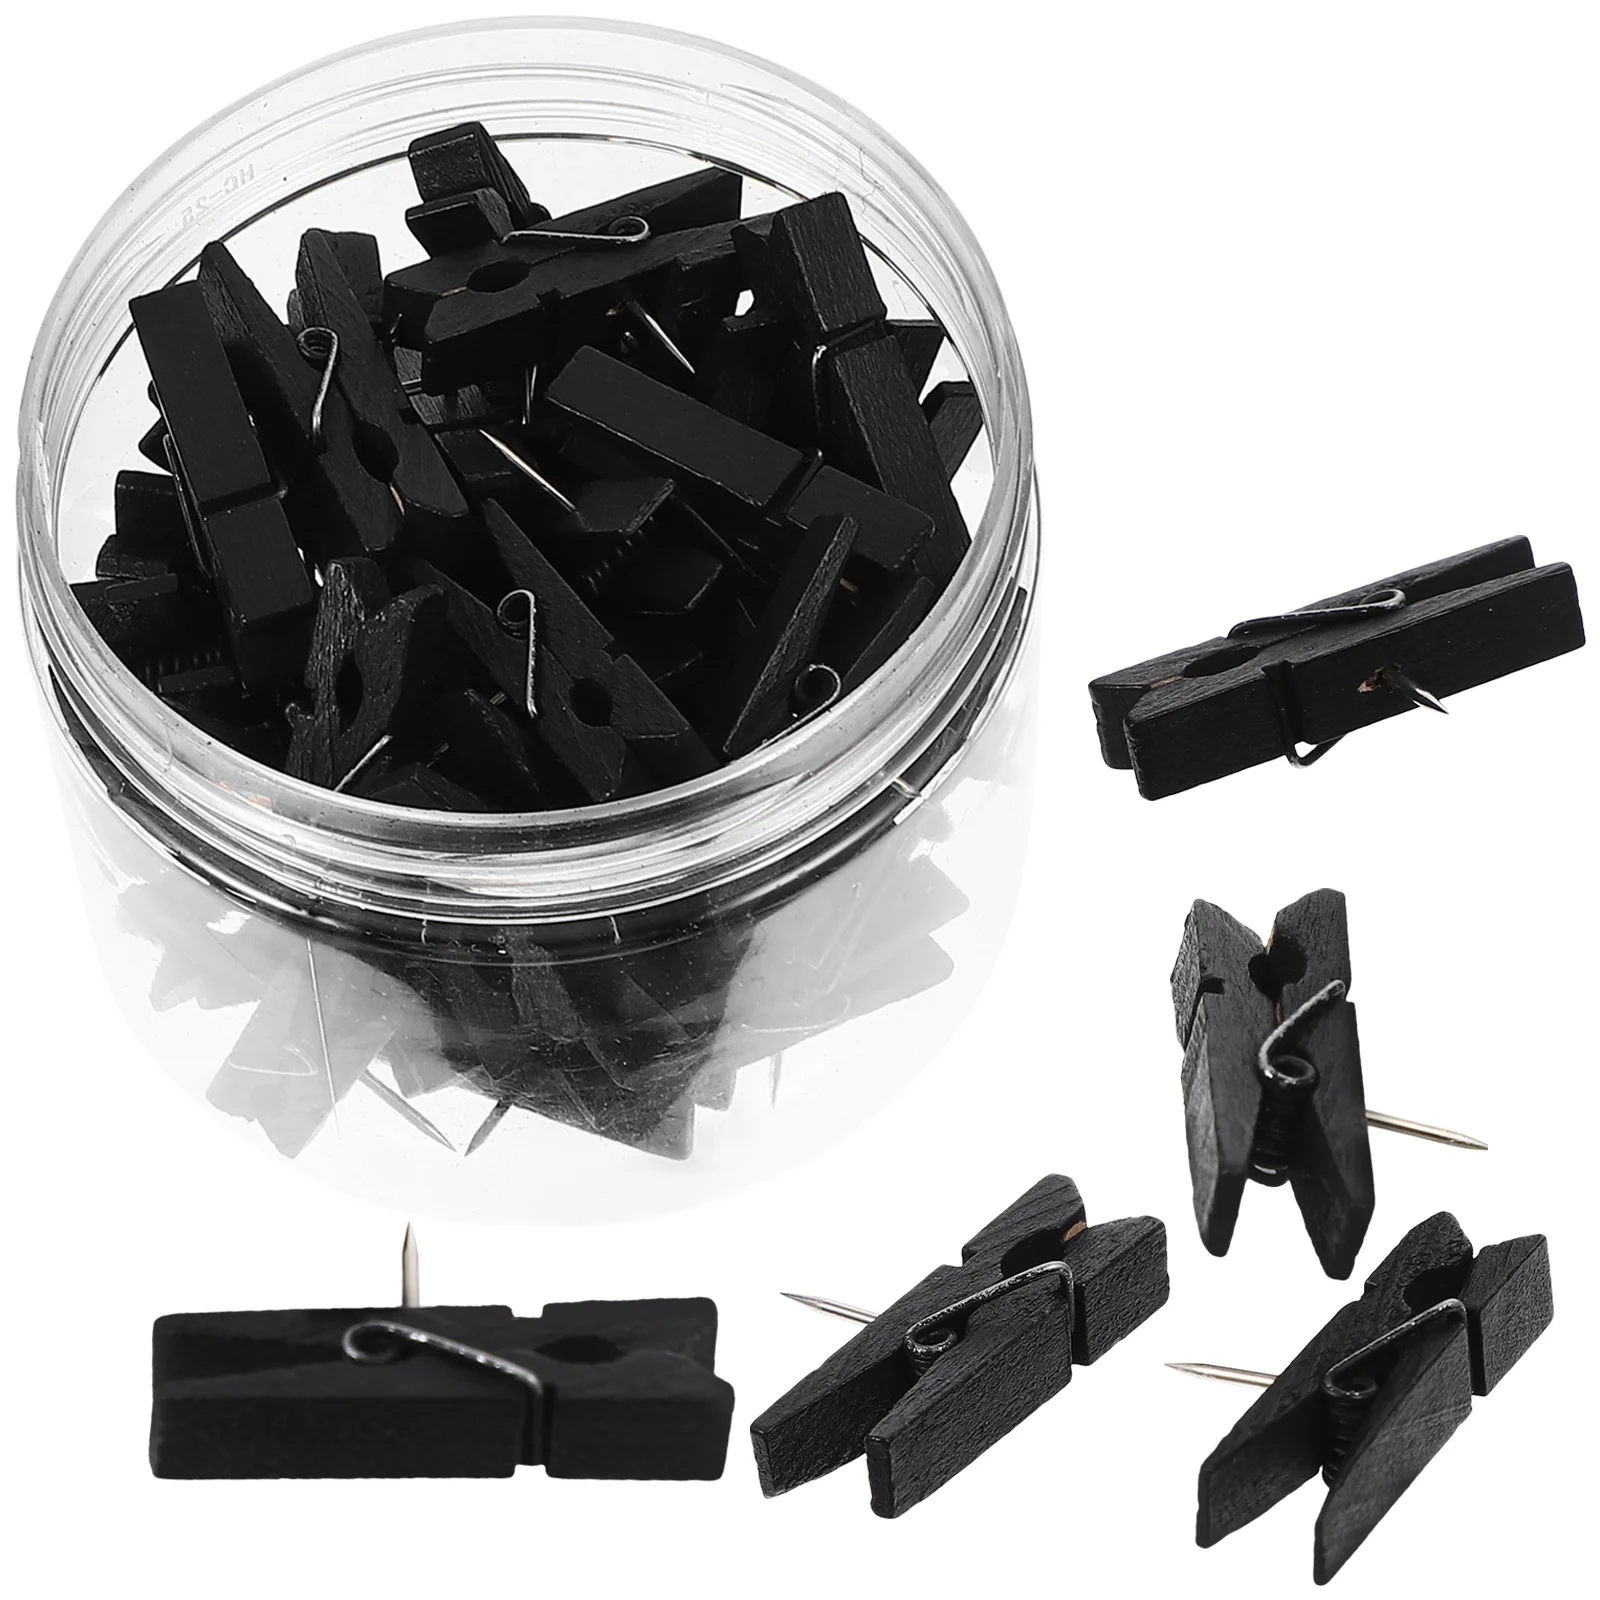 Tofficu Thumb Tacks 50Pcs Mini Wooden Clothespins Photo Paper Peg Pin Craft Clips Scrapbooking Arts Crafts Hanging Photos Black 8pcs 50pcs mini natural wooden memo paper clips wholesale for photo clothespin craft decoration clips pegs many size